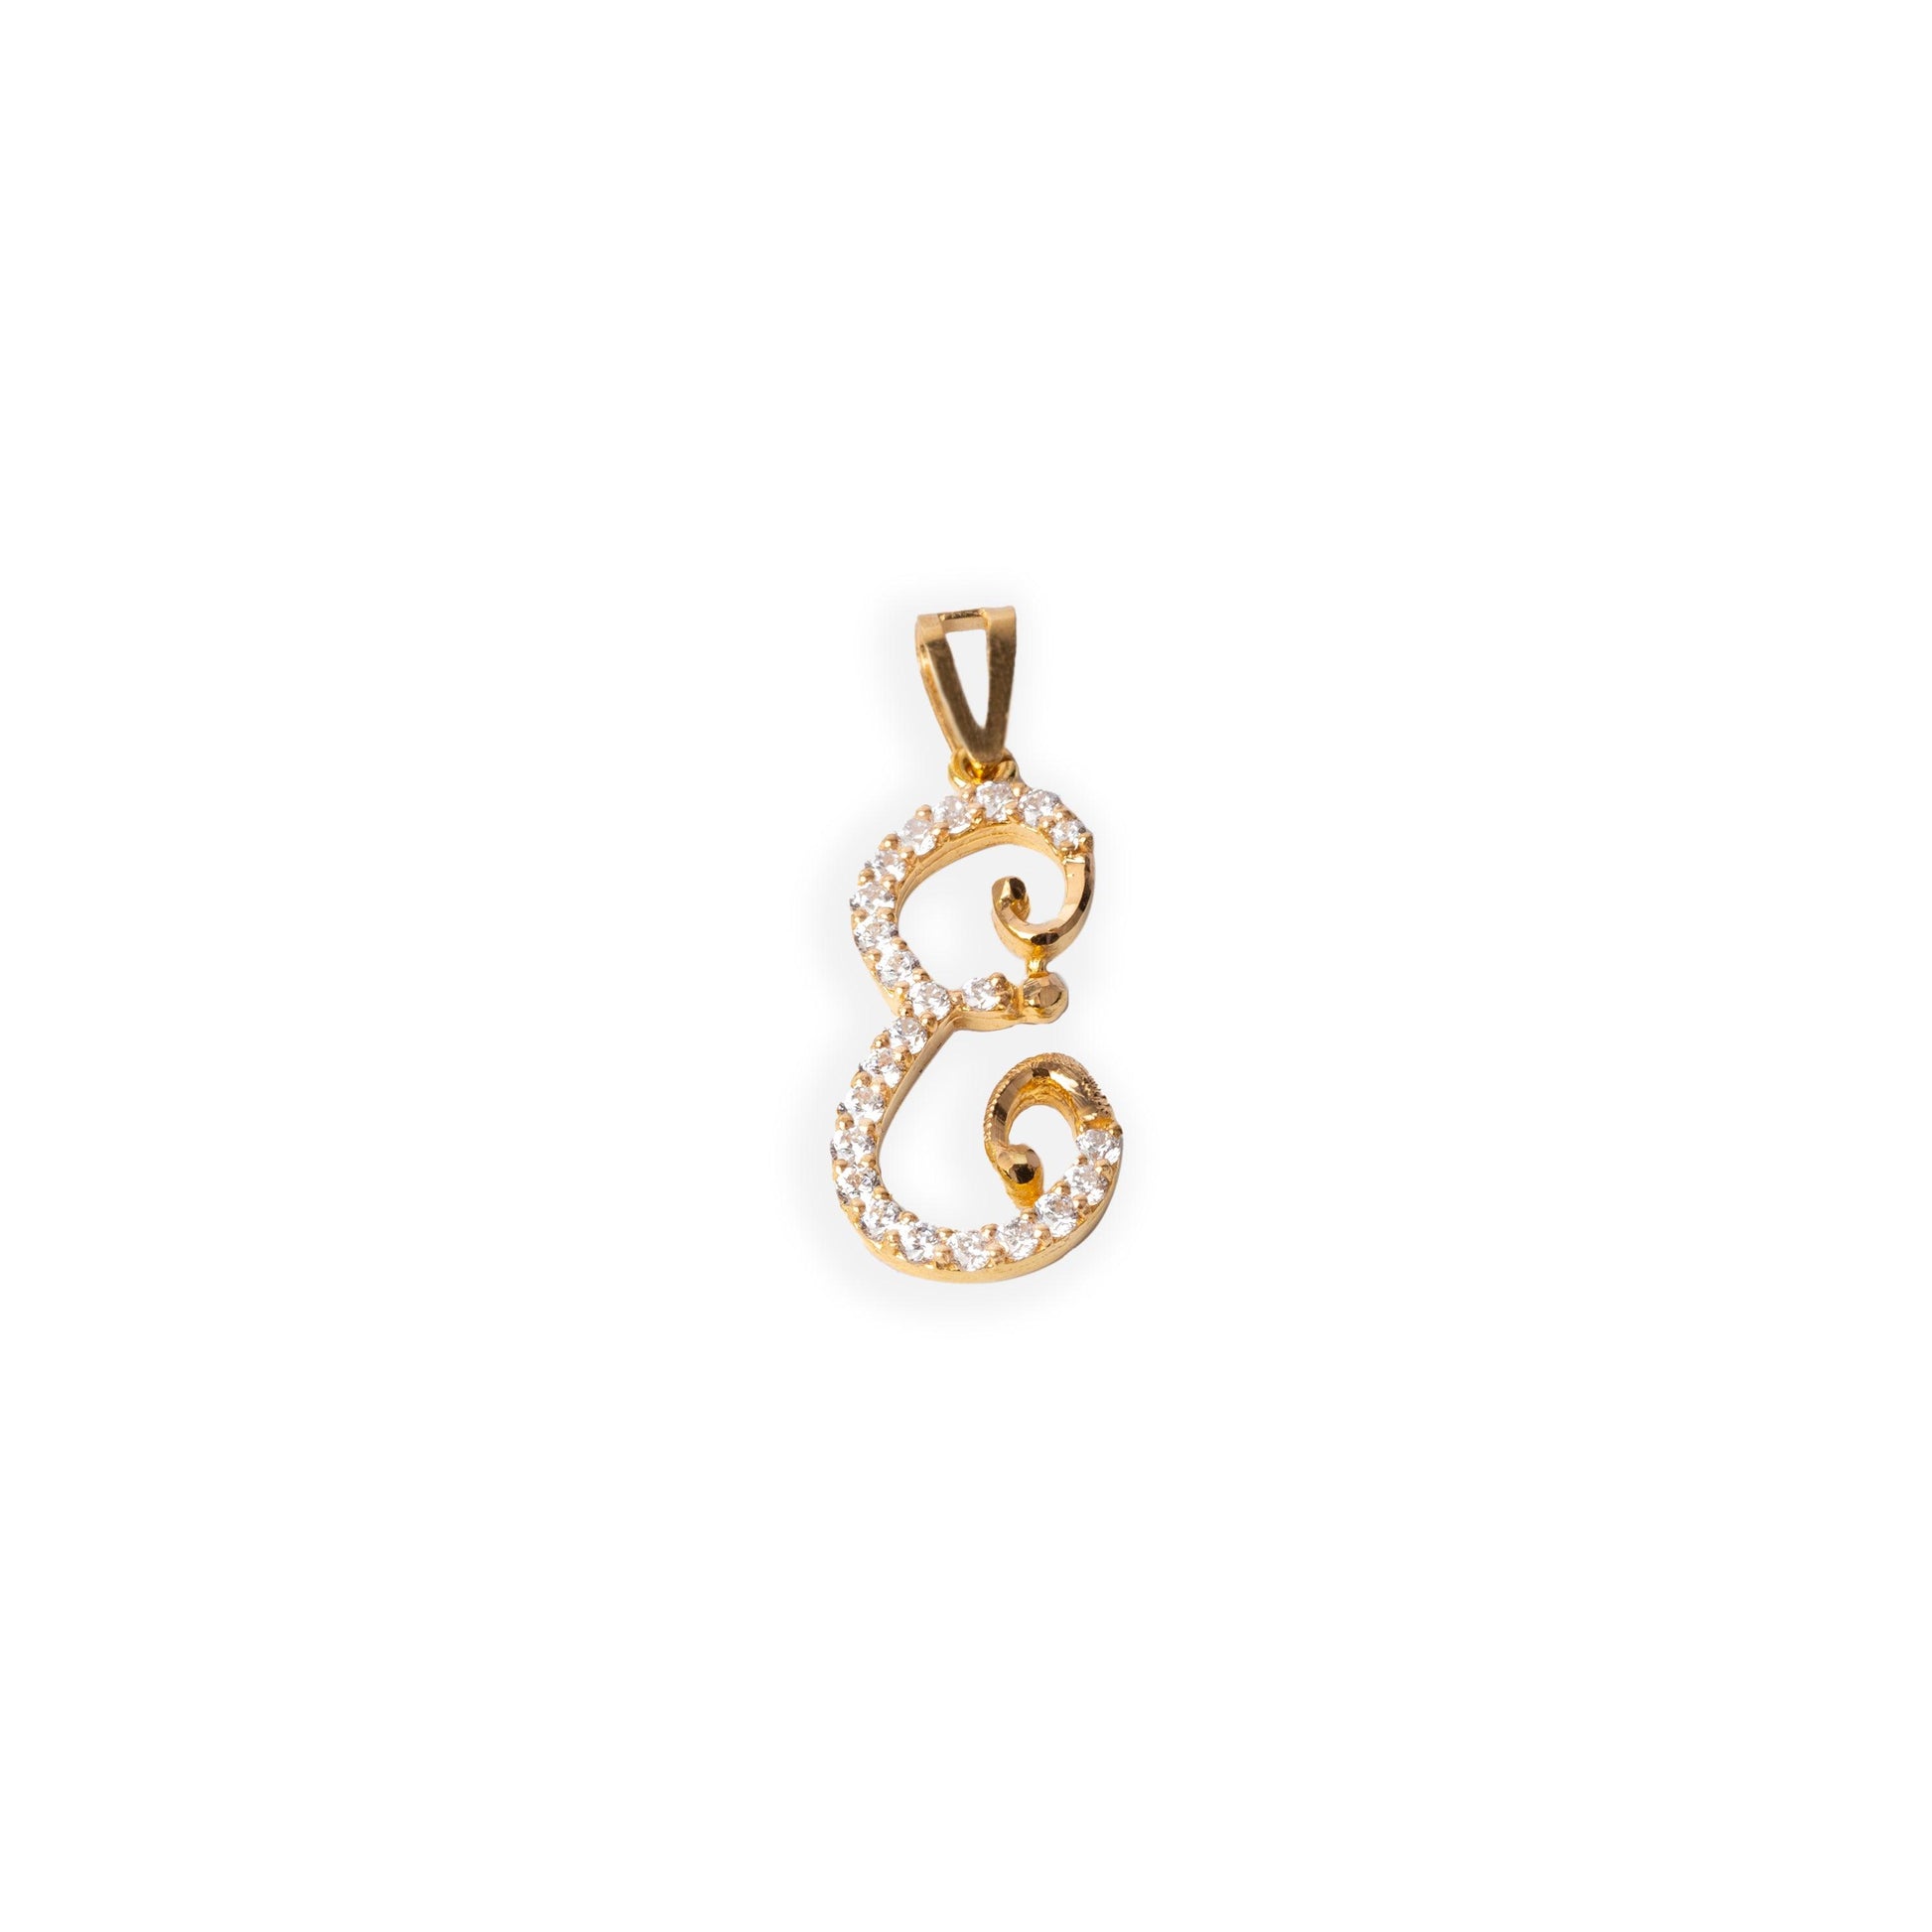 'E' 22ct Gold Initial Pendant with Cubic Zirconia Stones P-7039-E - Minar Jewellers